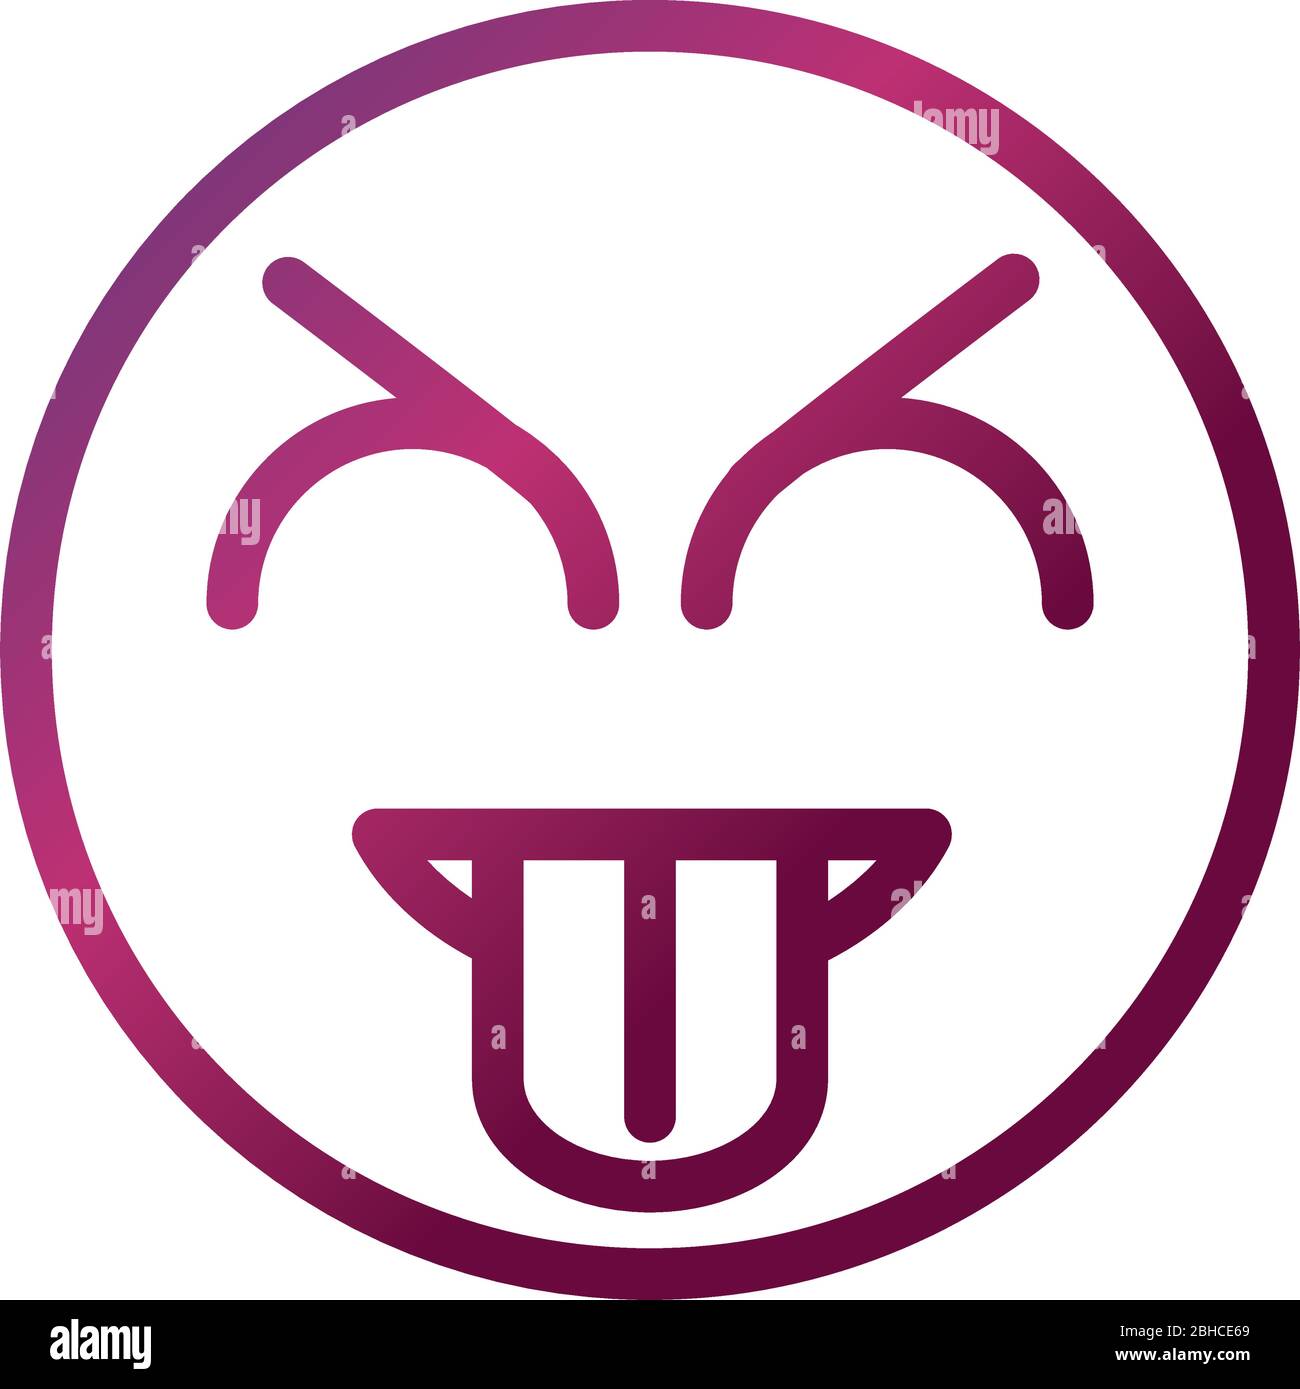 tongue out funny smiley emoticon face expression vector illustration gradient style icon Stock Vector